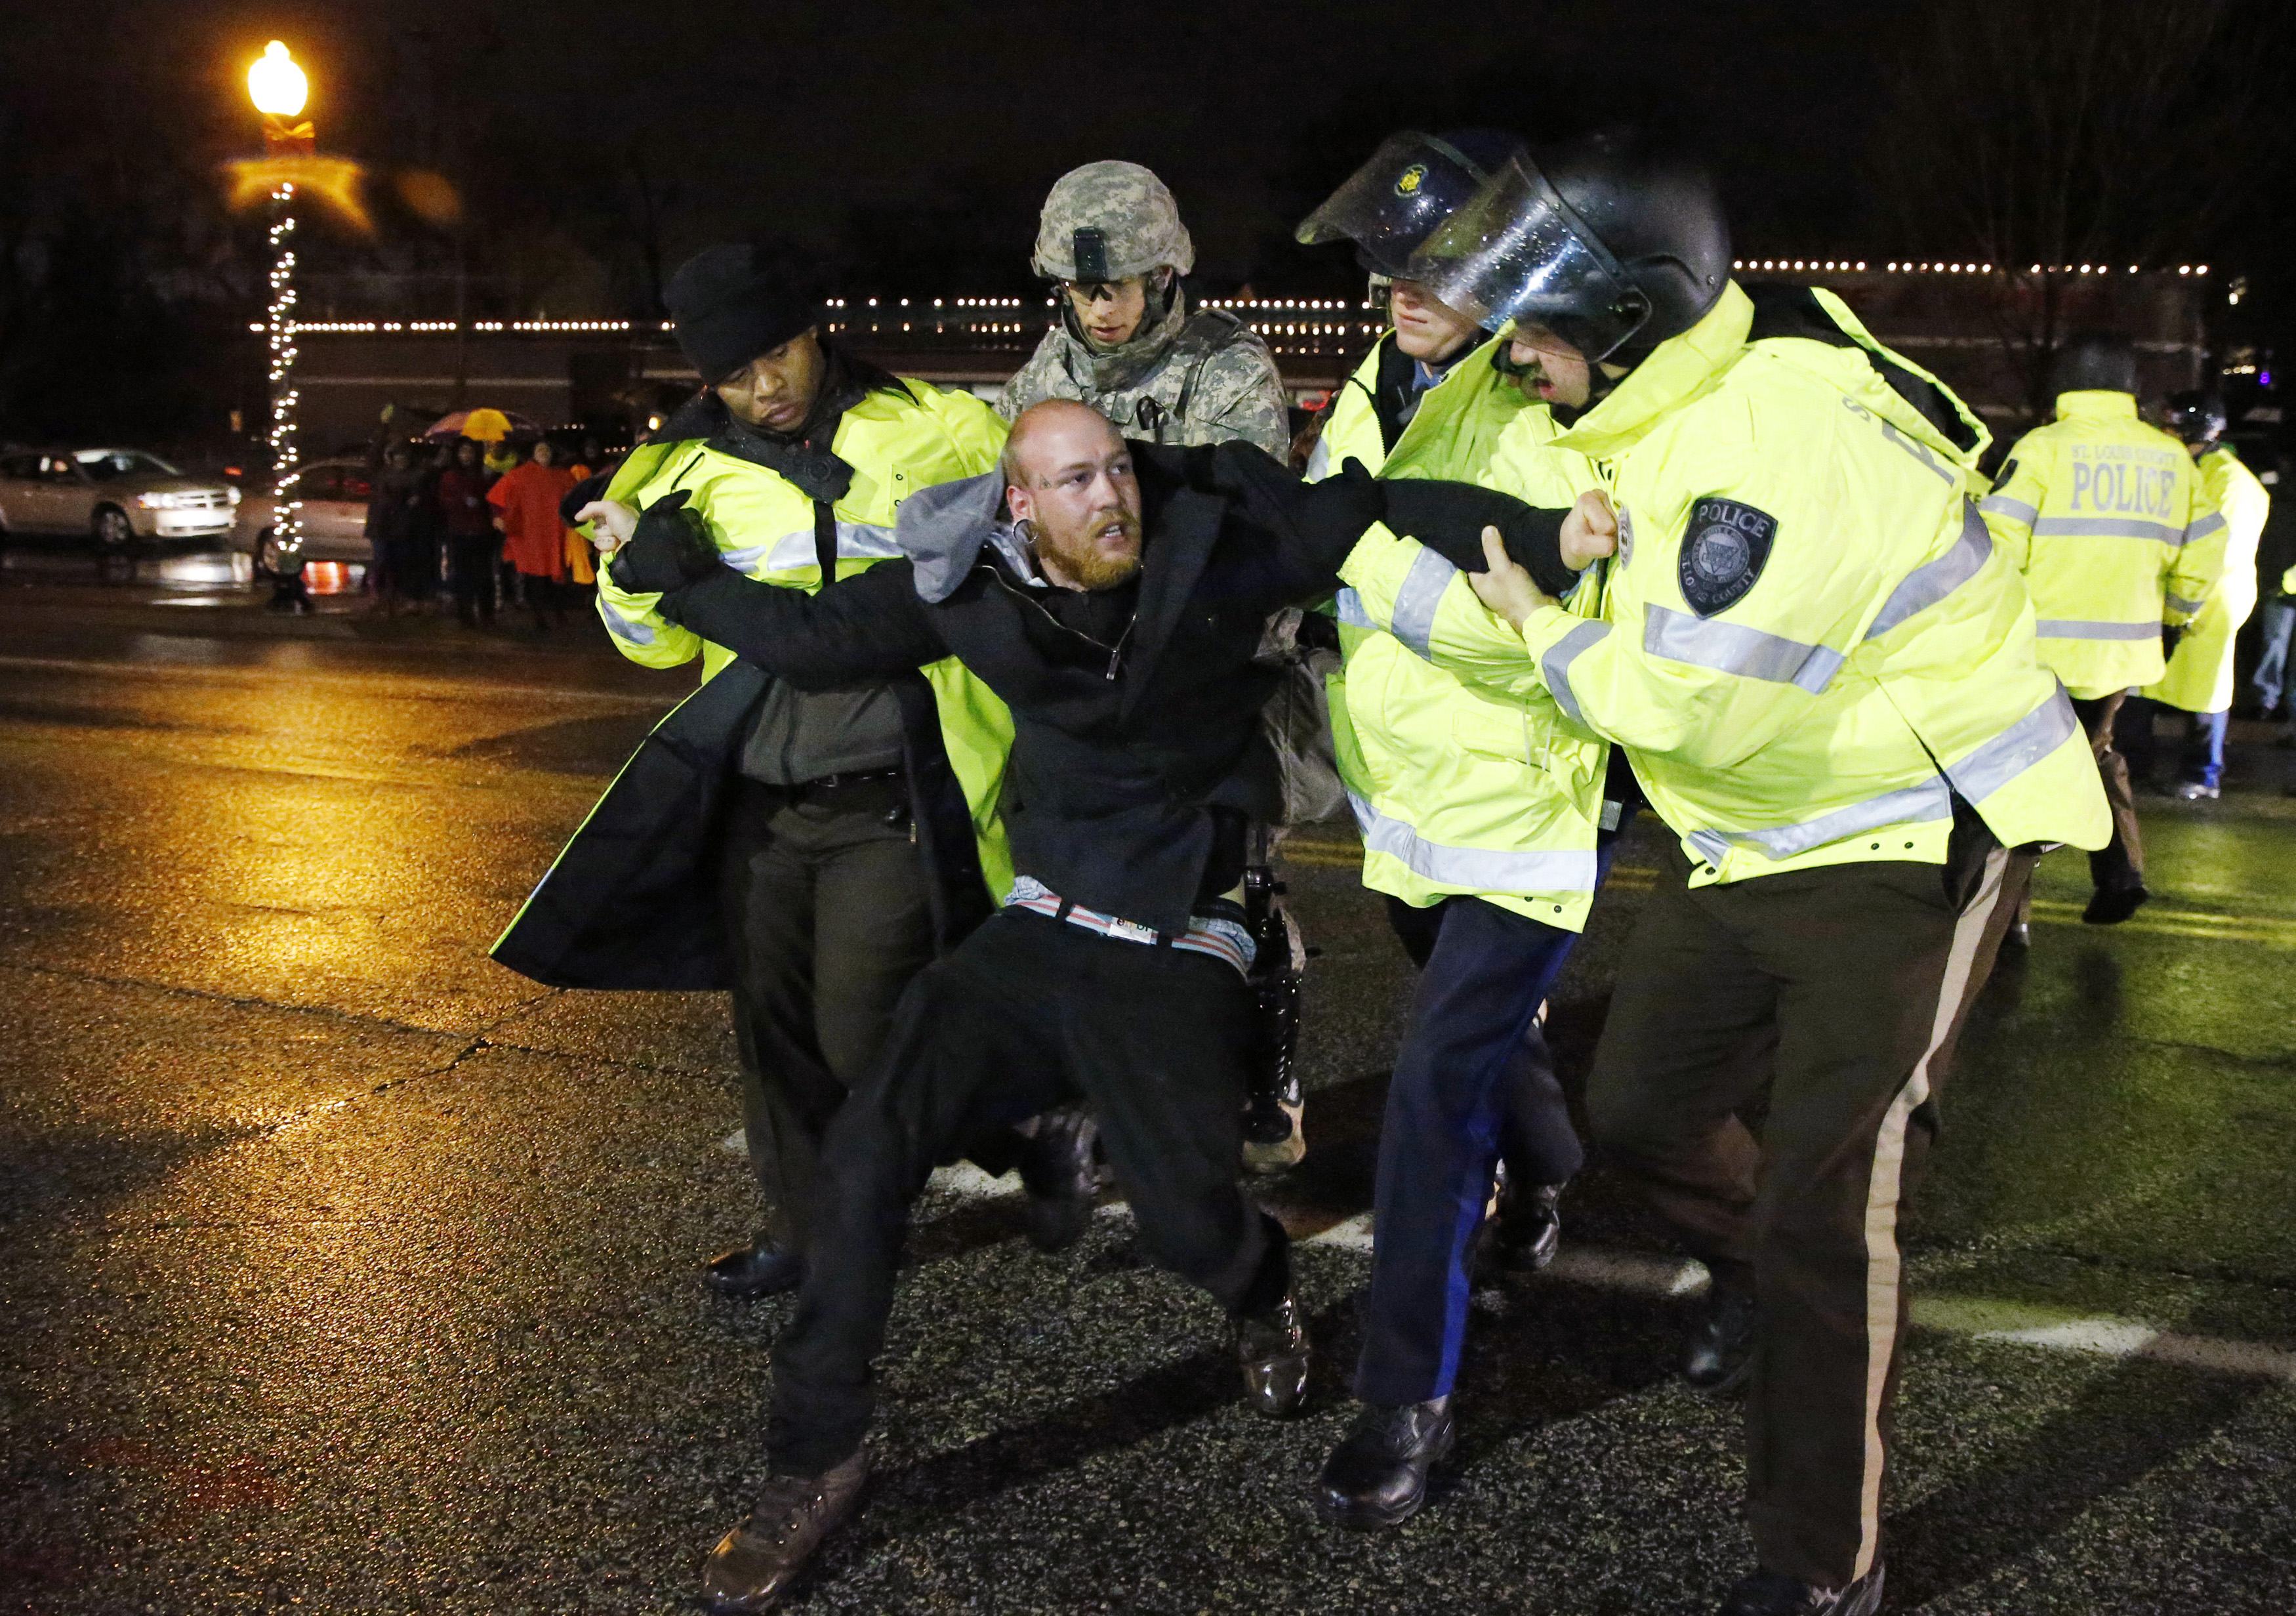 How could the US resolve race-based grievances like Ferguson riots?